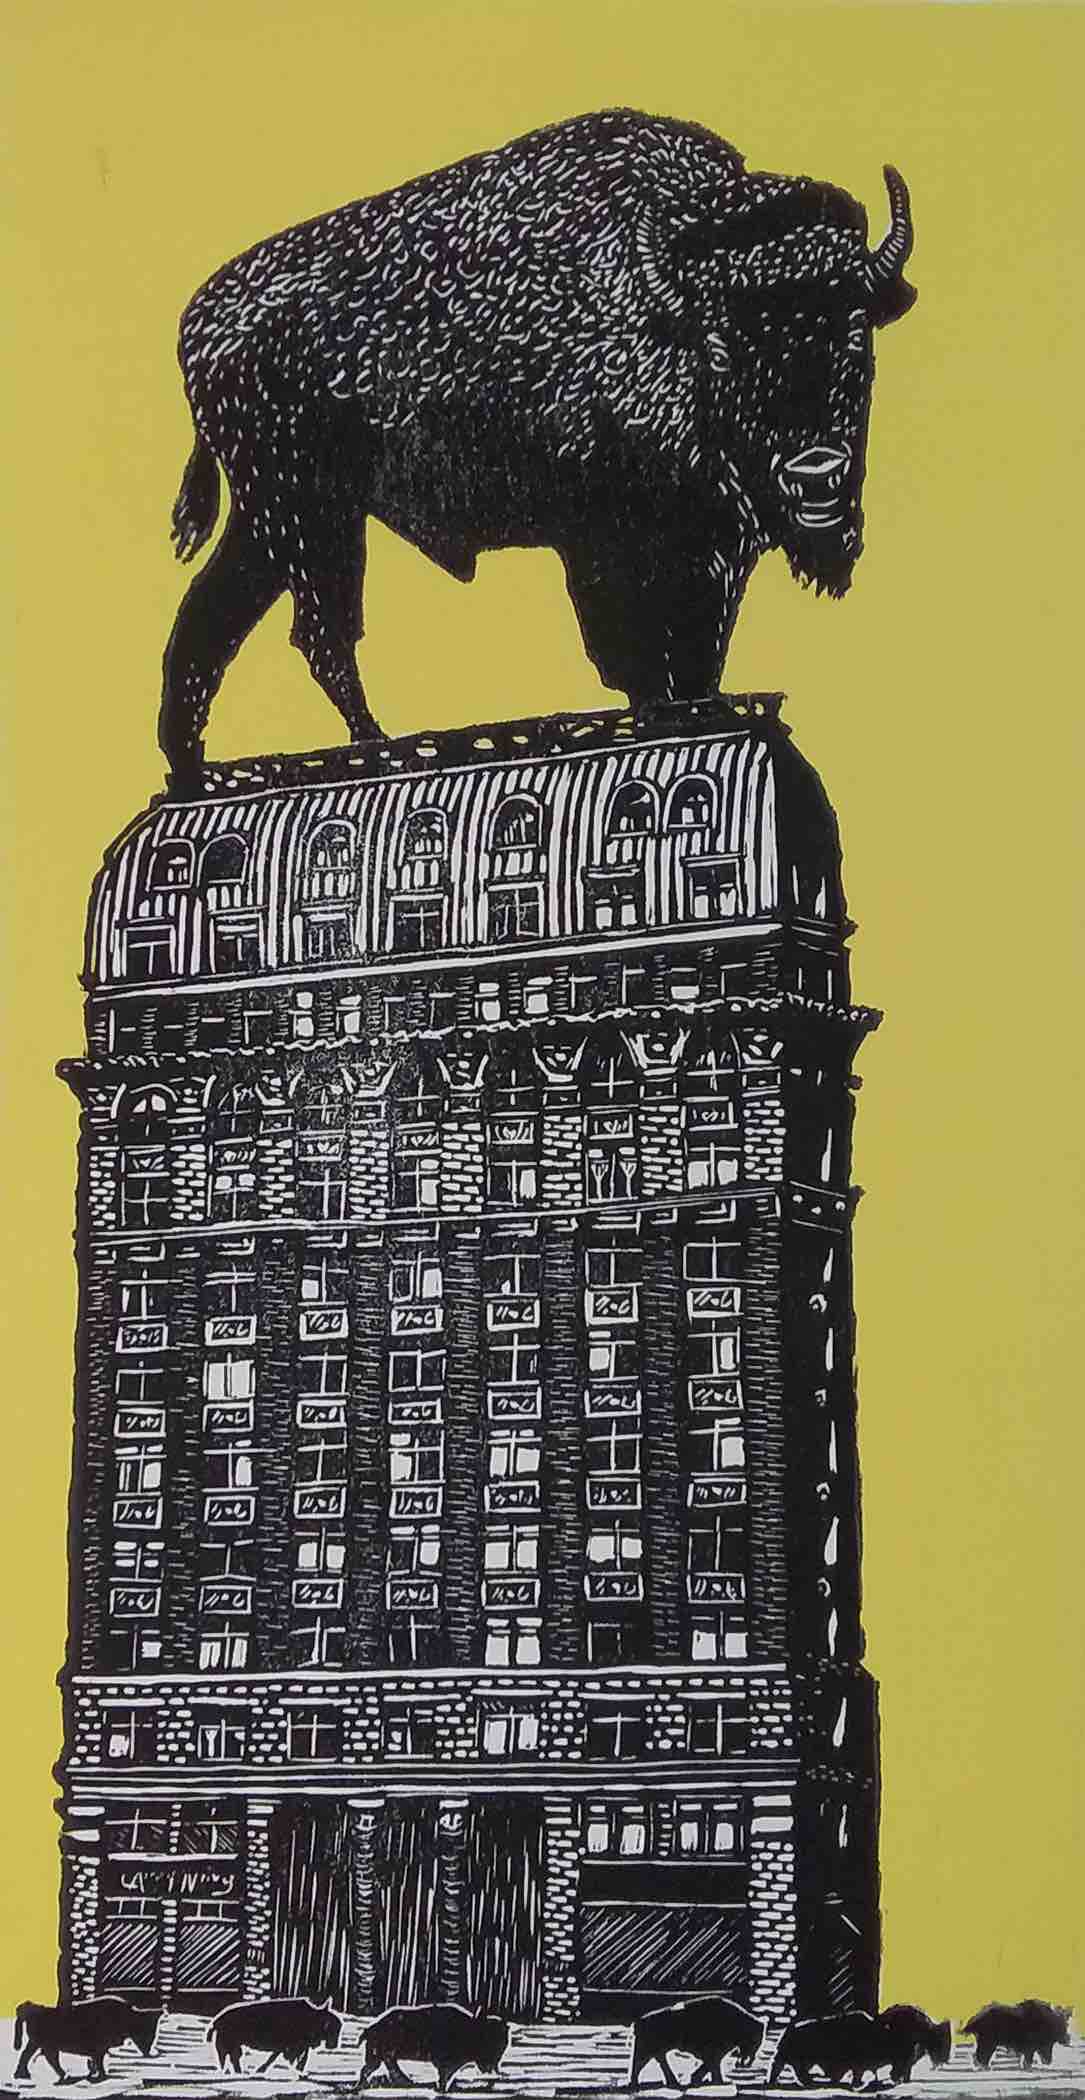 This is a print of a heritage office building, brick, with ornamental arched windows at its top and rickety retail windows at street level. The building is black and white, against a sunflower yellow sky. A giant bison stands on the roof head turned towards us - about half the size of the building itself. His coat is furry and his horns sharp. On the sidewalk below, an unhurried herd of small bison ambles away from the building, their heads bowed towards the earth.